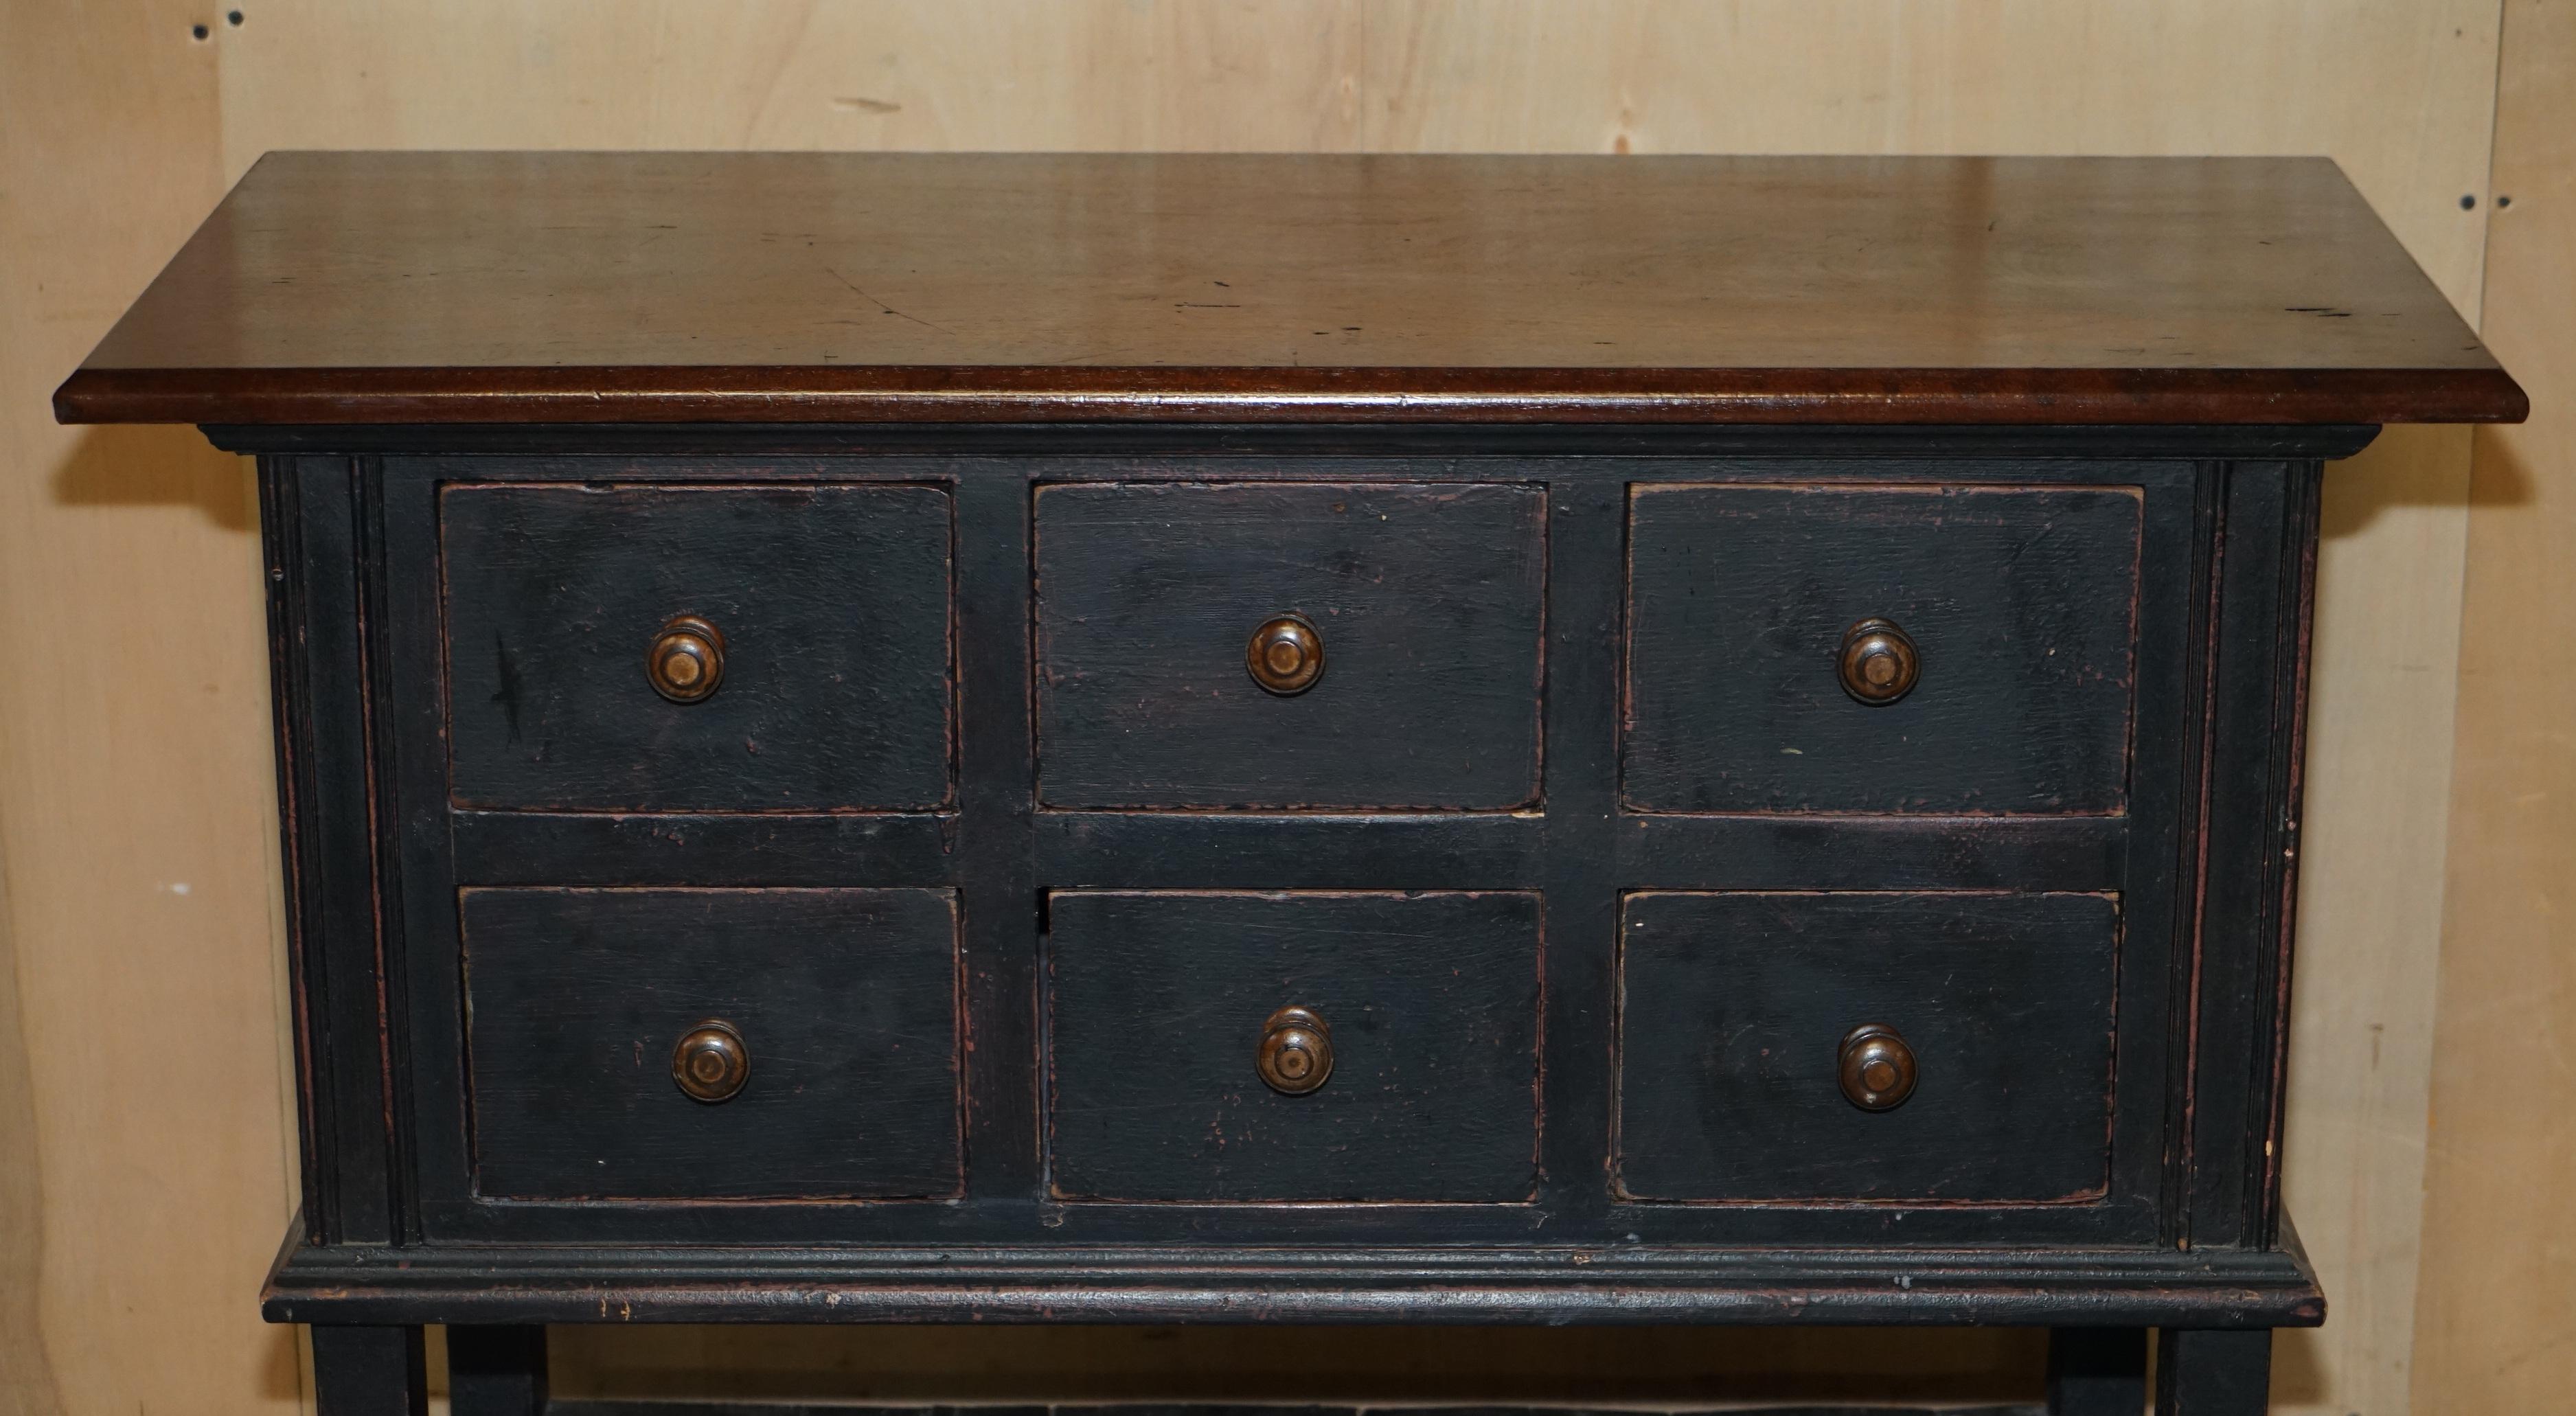 French Victorian Oak Hand Painted Haberdashery Apothecary Sideboard Chest of Drawers